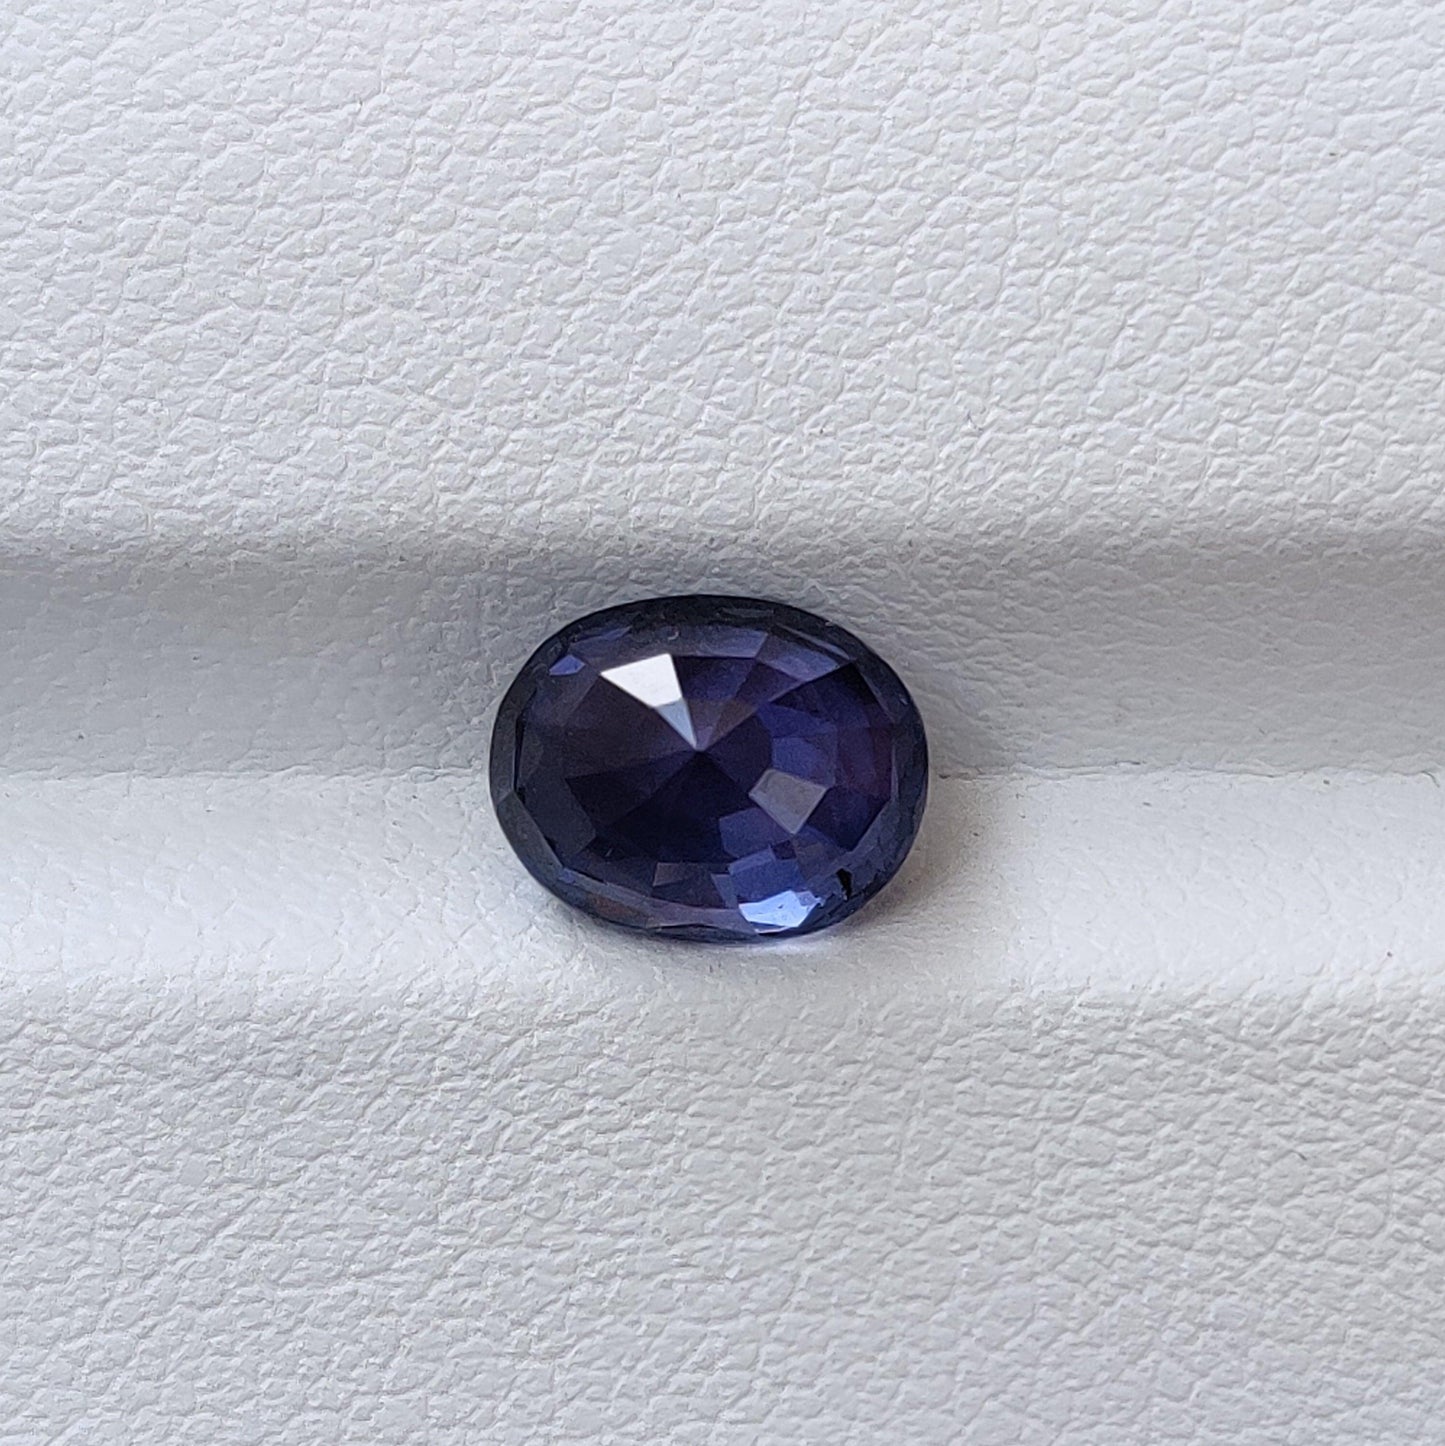 Blue-ish Violet Sapphire Natural Heated 3.08ct